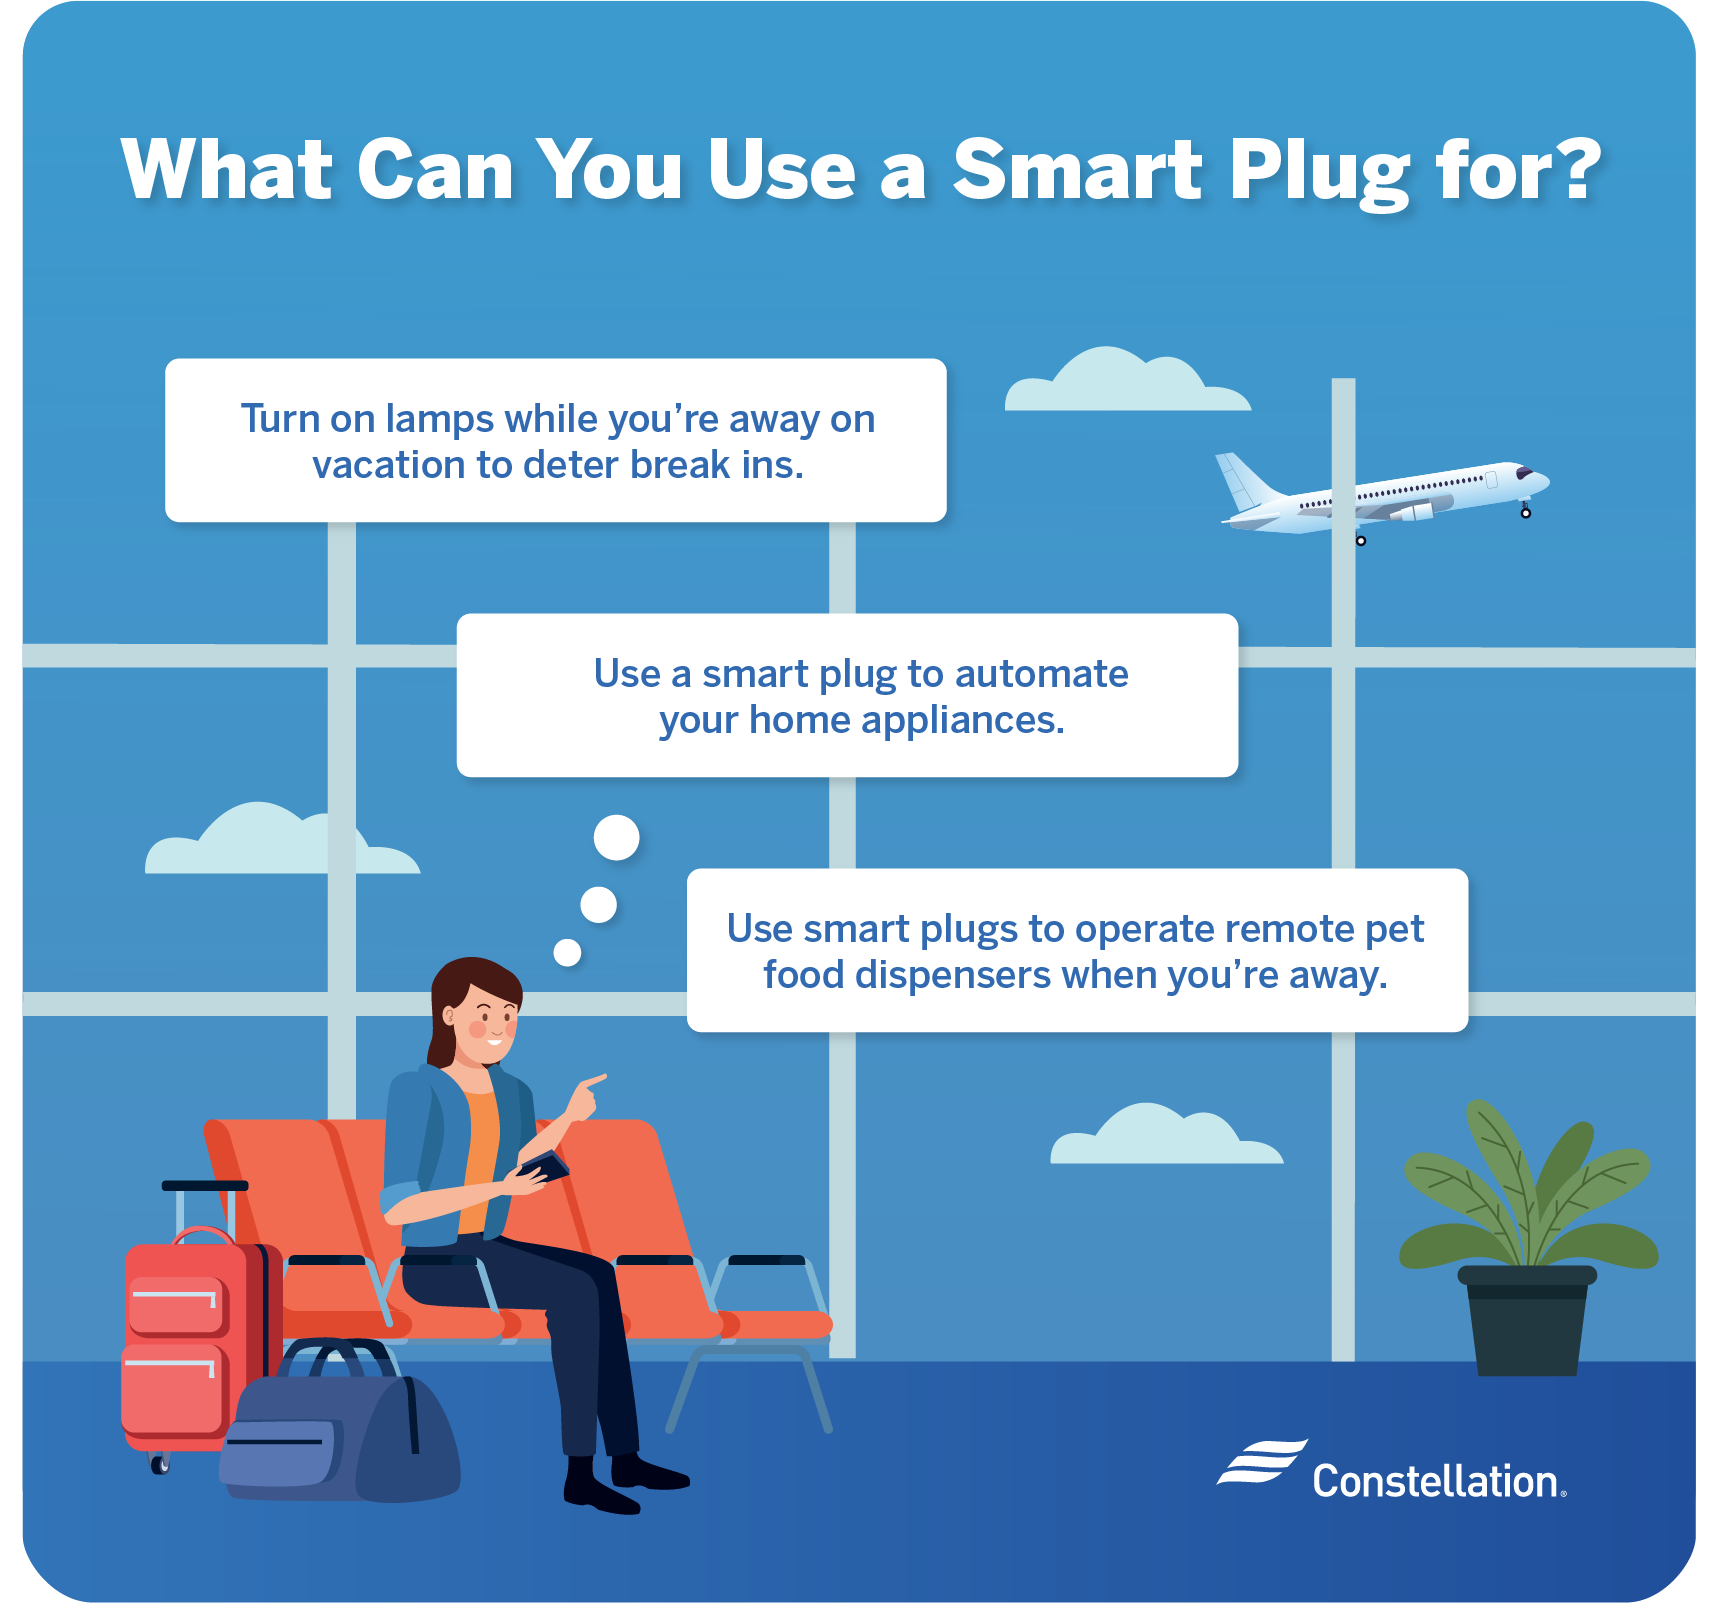 What can you use a smart plug for?